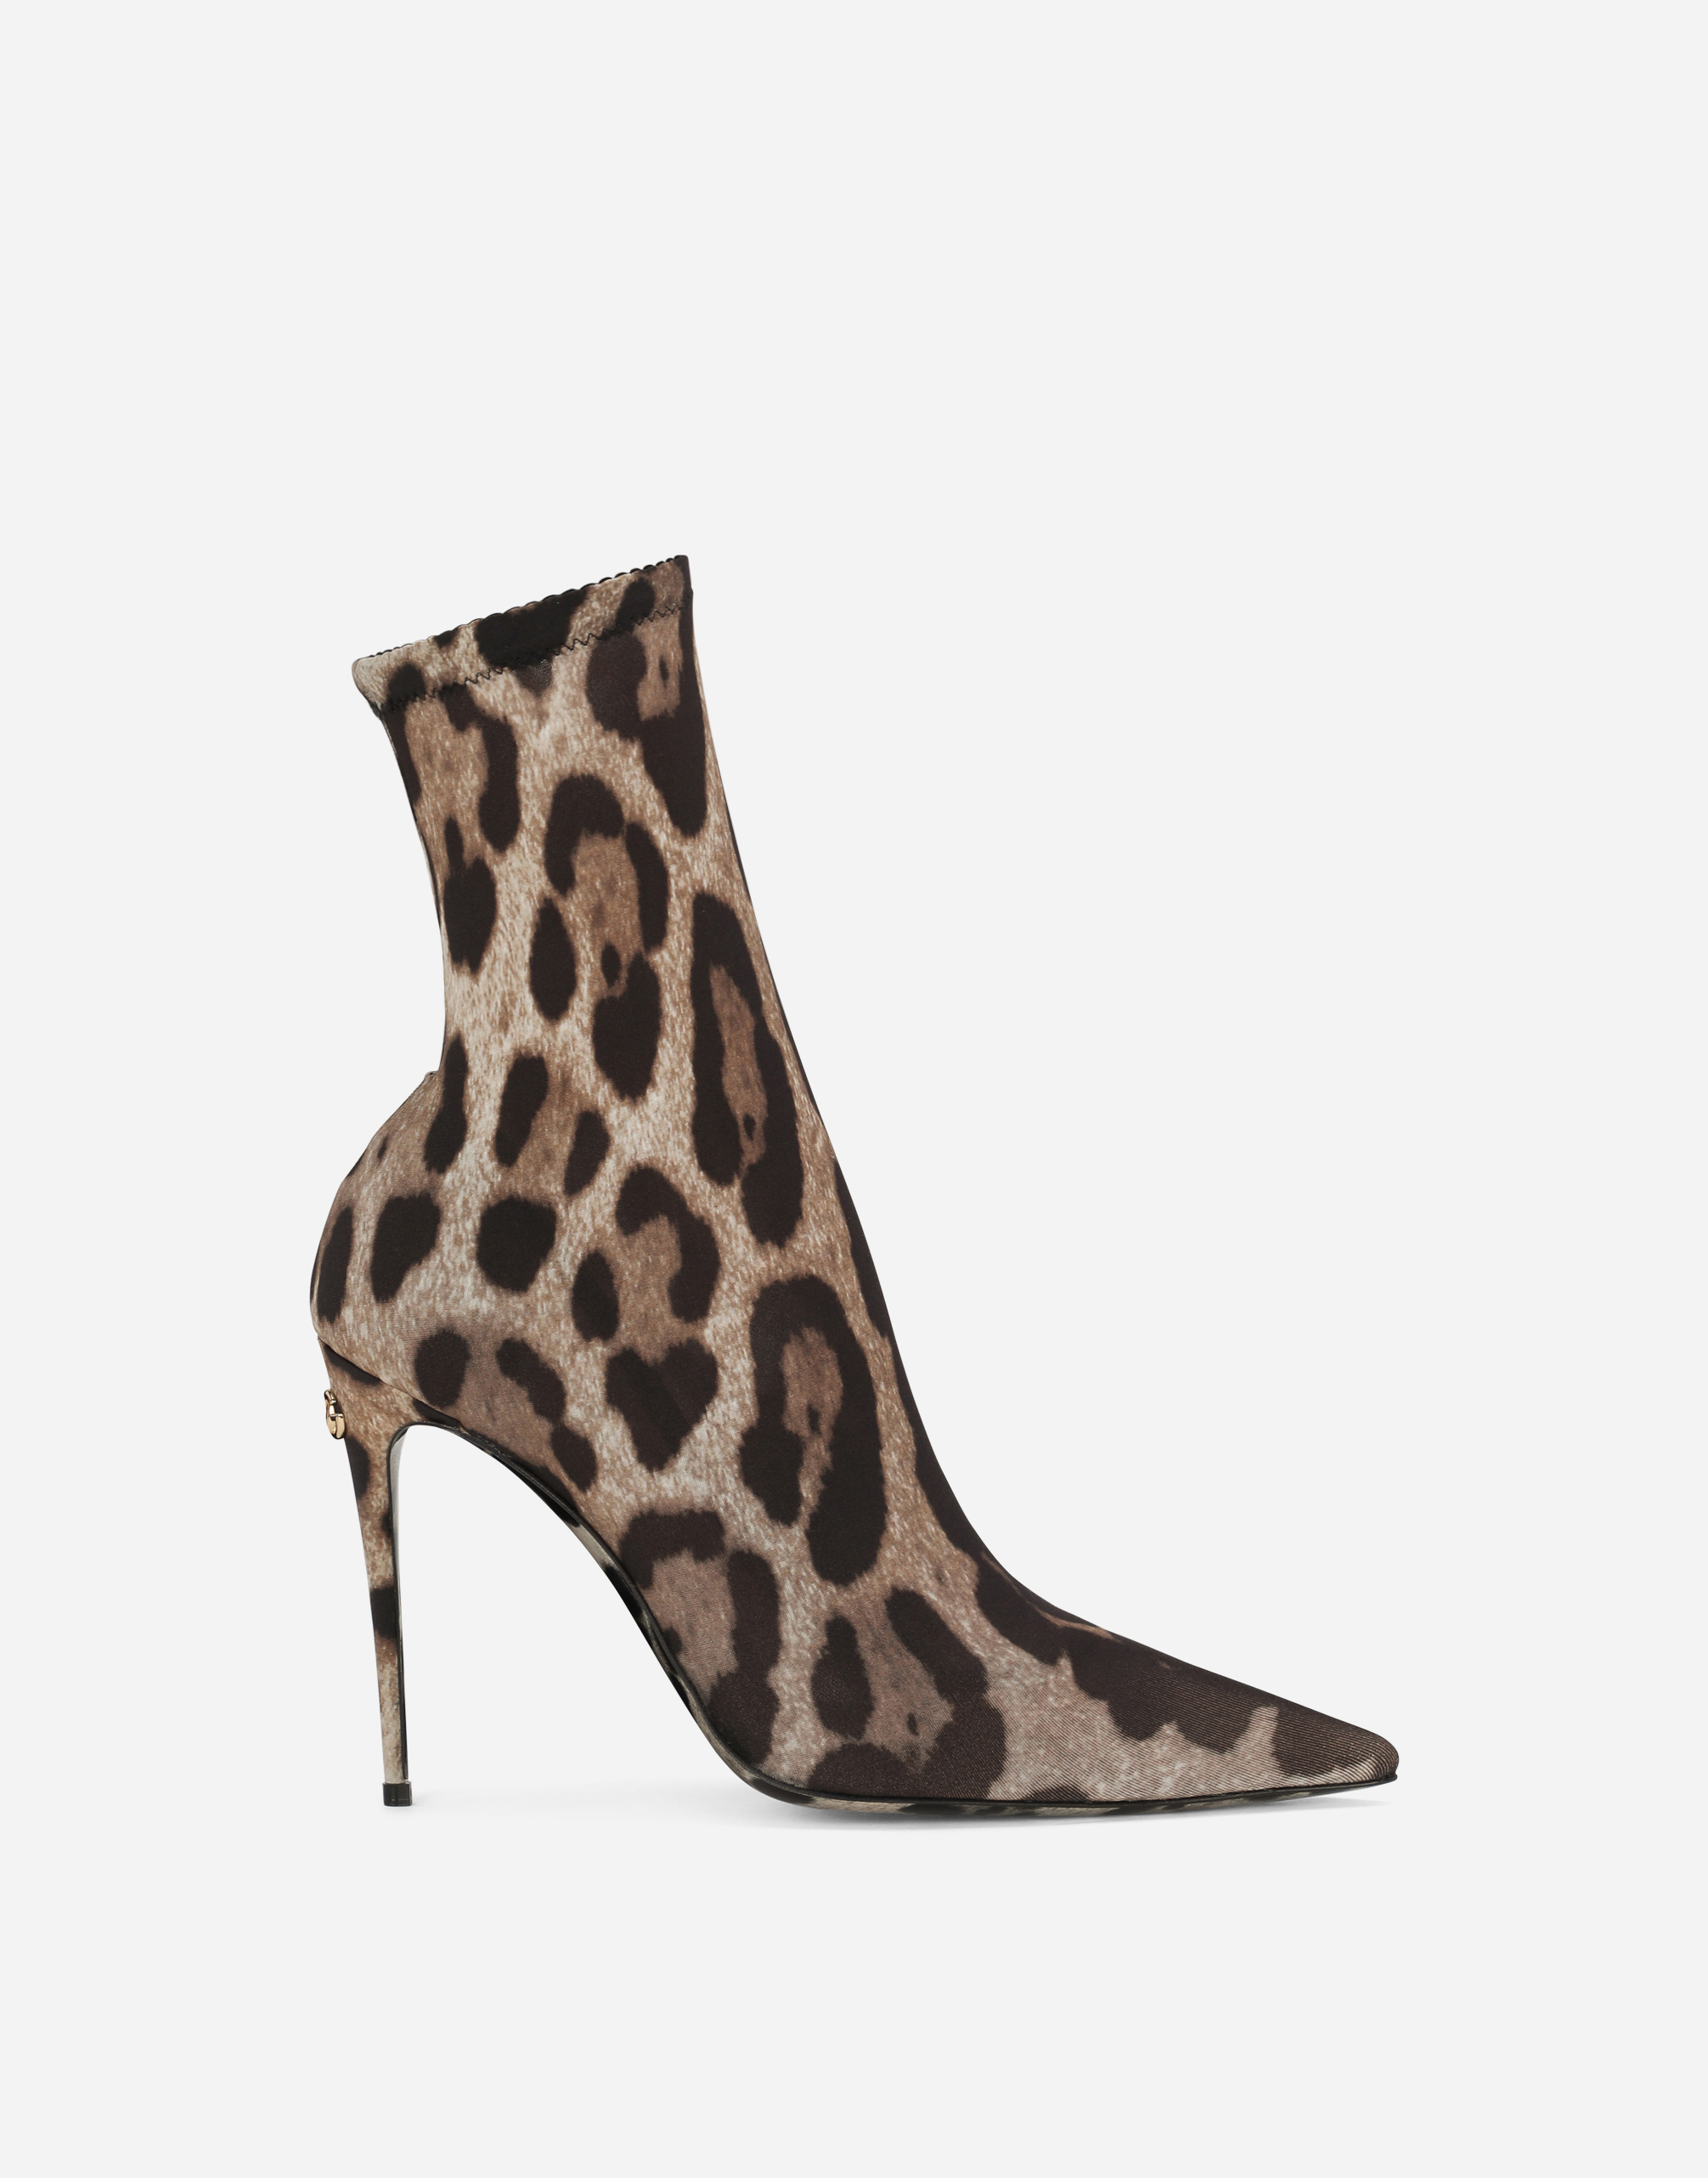 KIM DOLCE&GABBANA Leopard-print stretch fabric ankle boots in Animal Print